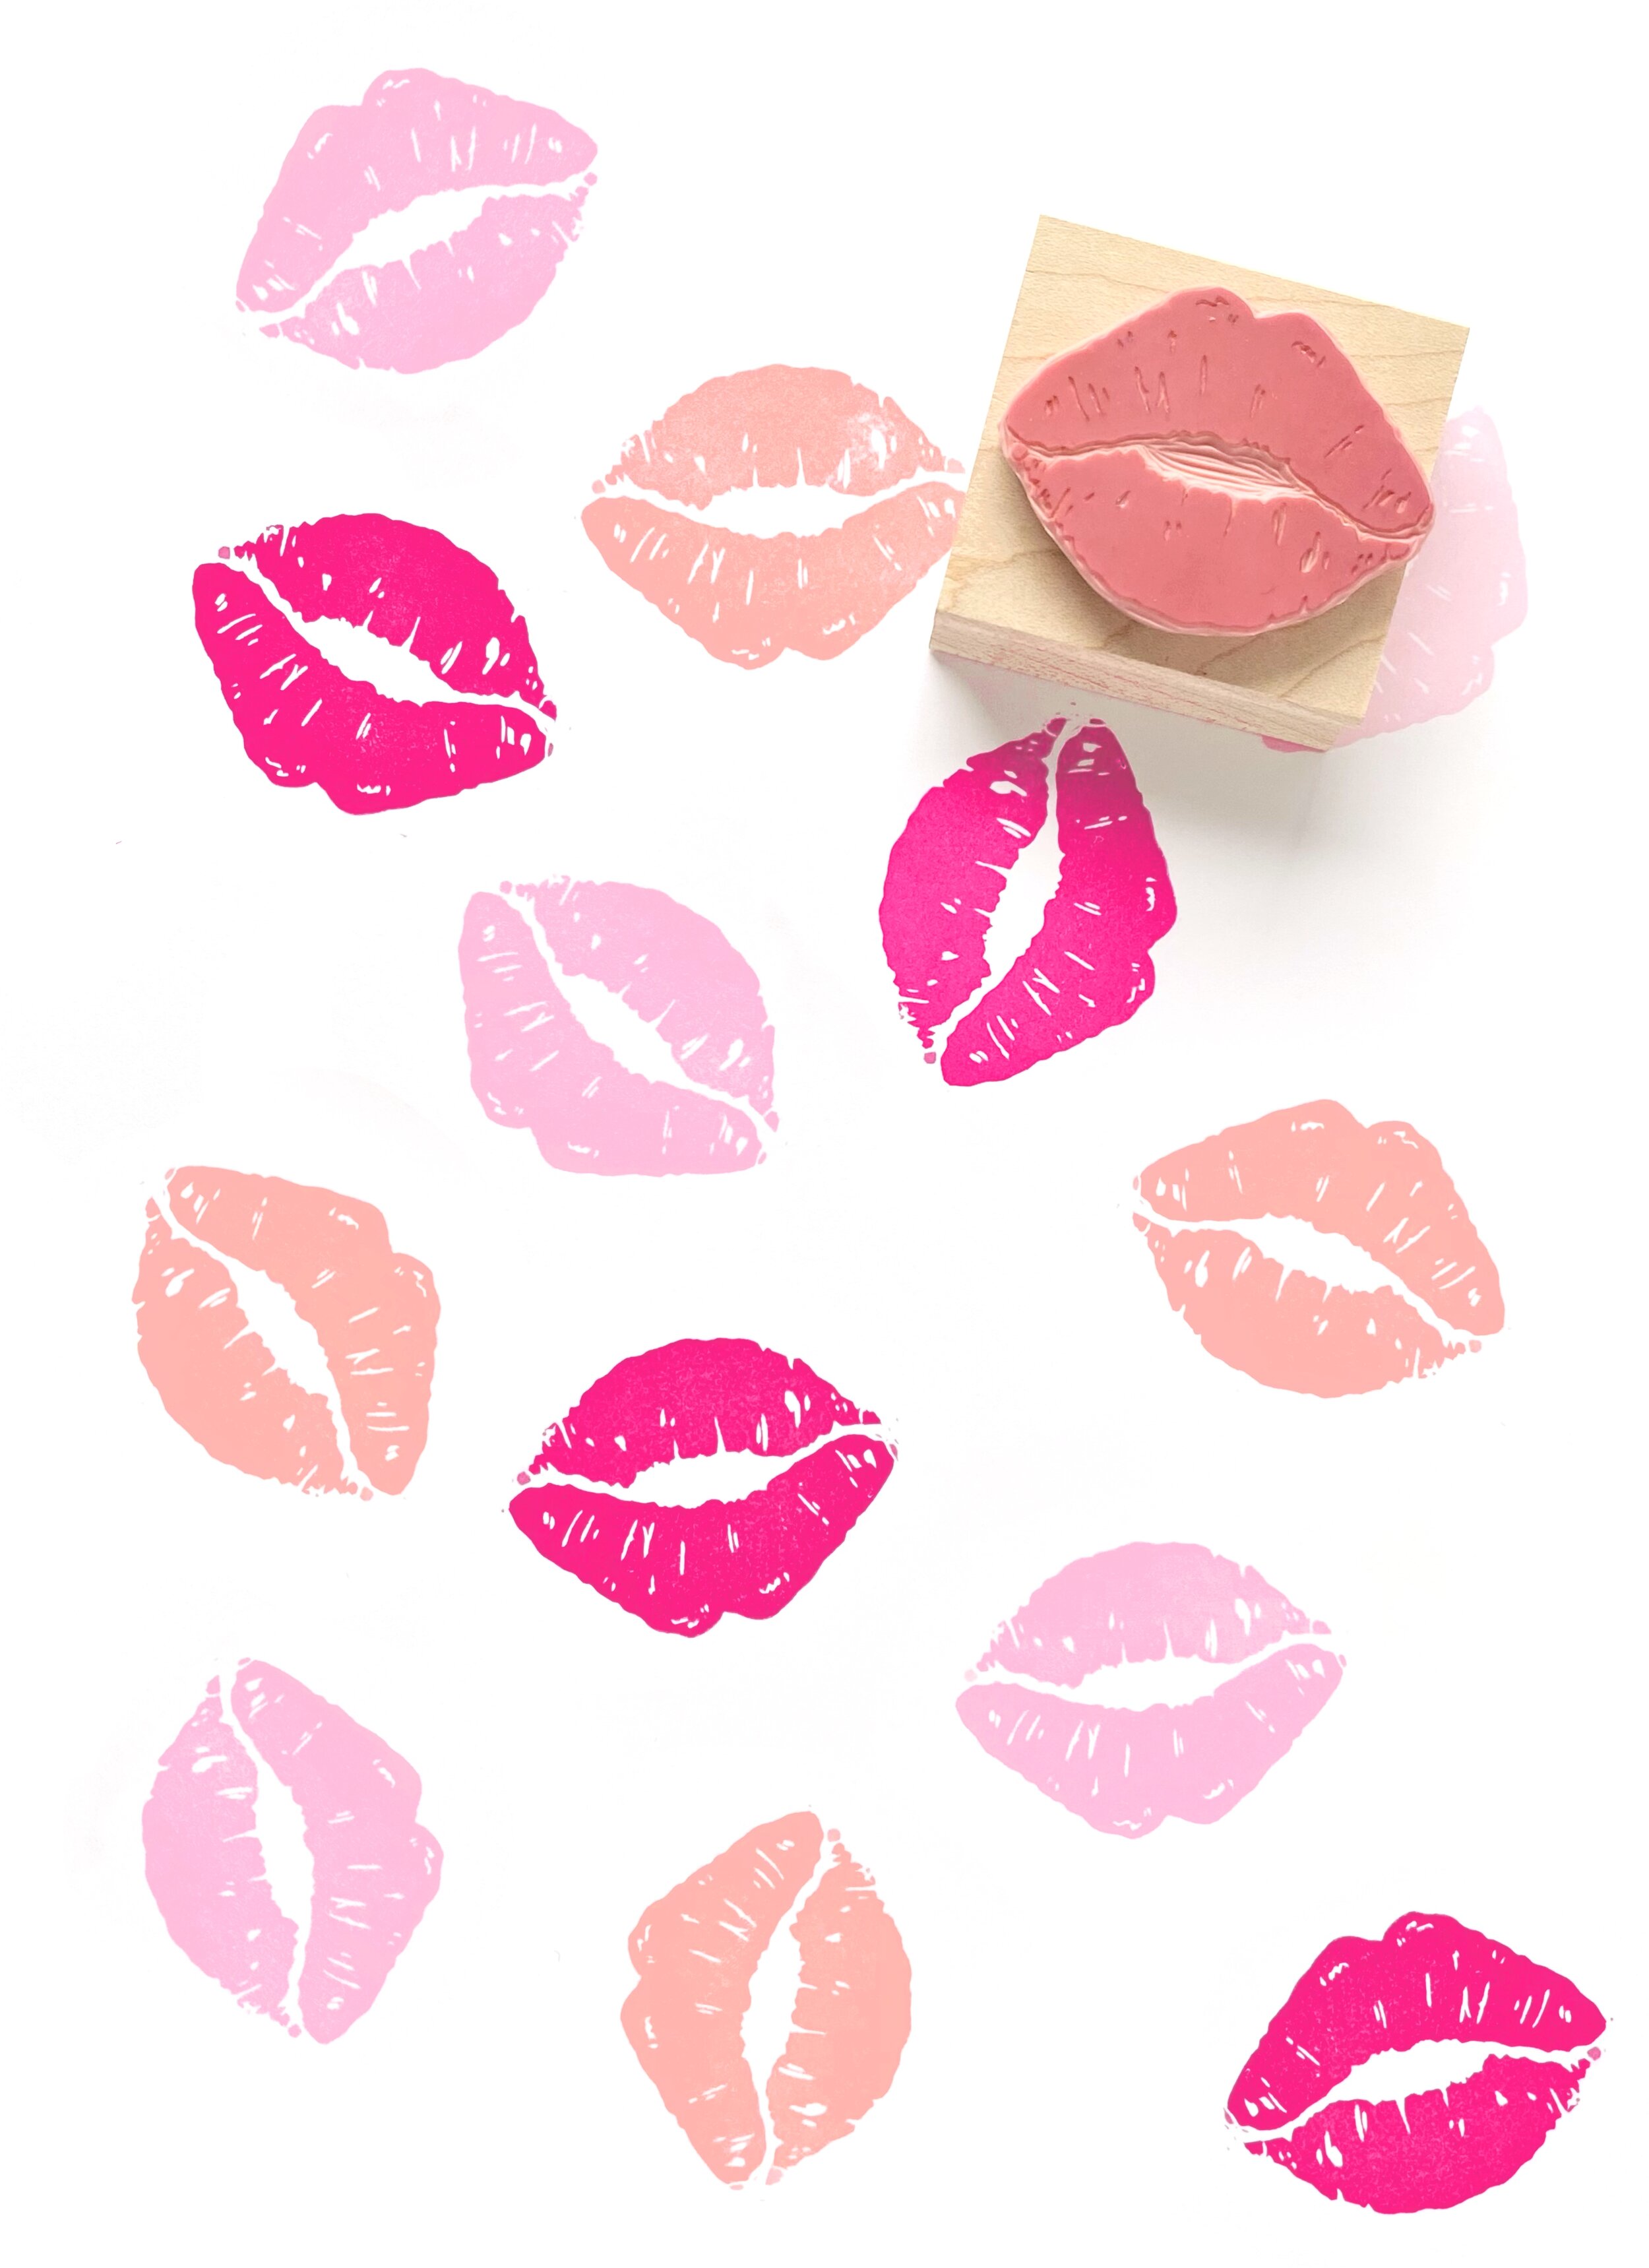 Stamps by Impression ST 0450 Lips Kiss Rubber Stamp 1 x 1.75